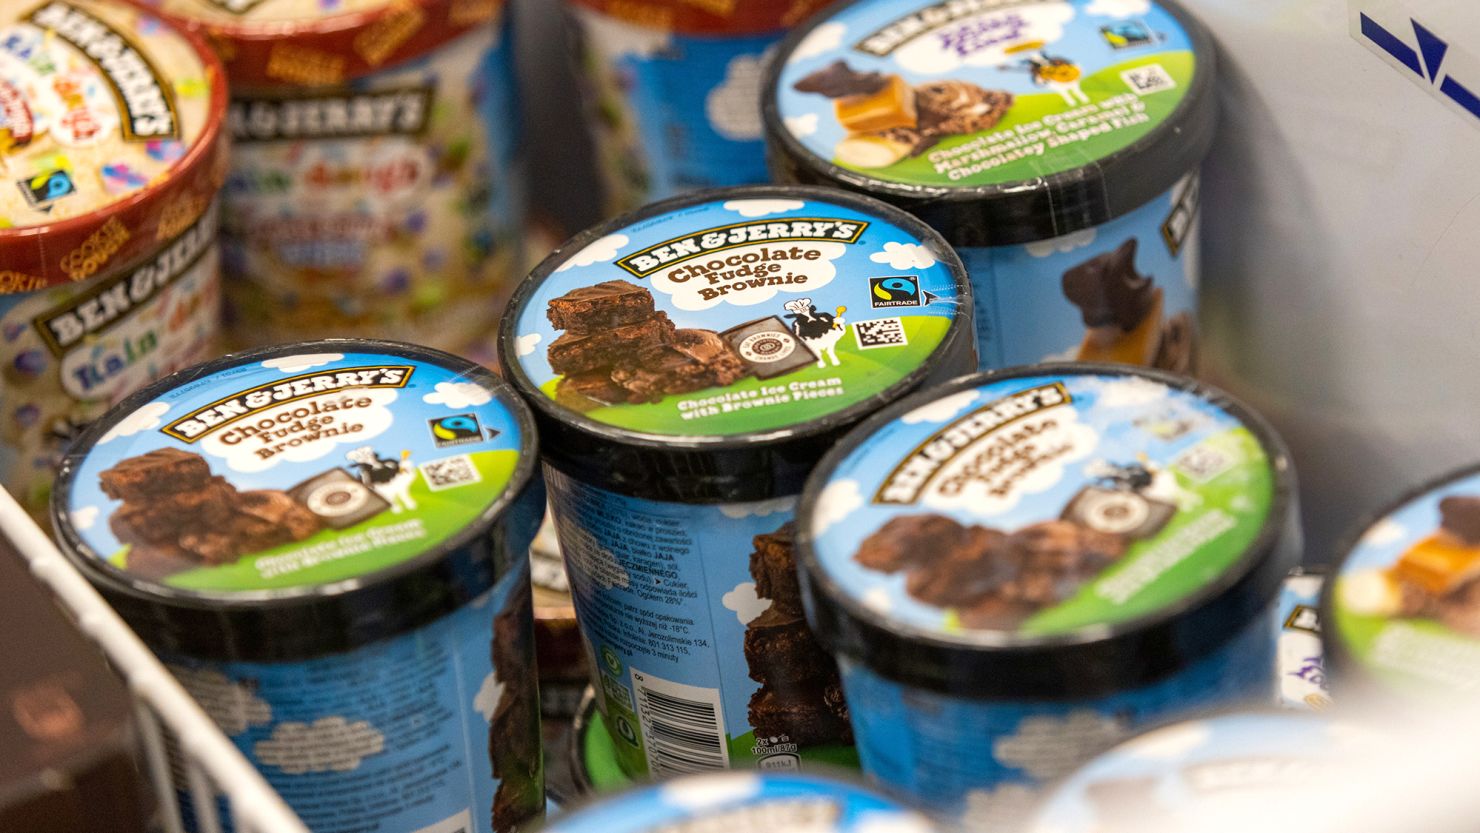 Tubs of Ben & Jerry's, manufactured by Unilever, at an Iceland Foods supermarket in Christchurch, United Kingdom, pictured in June 2022.